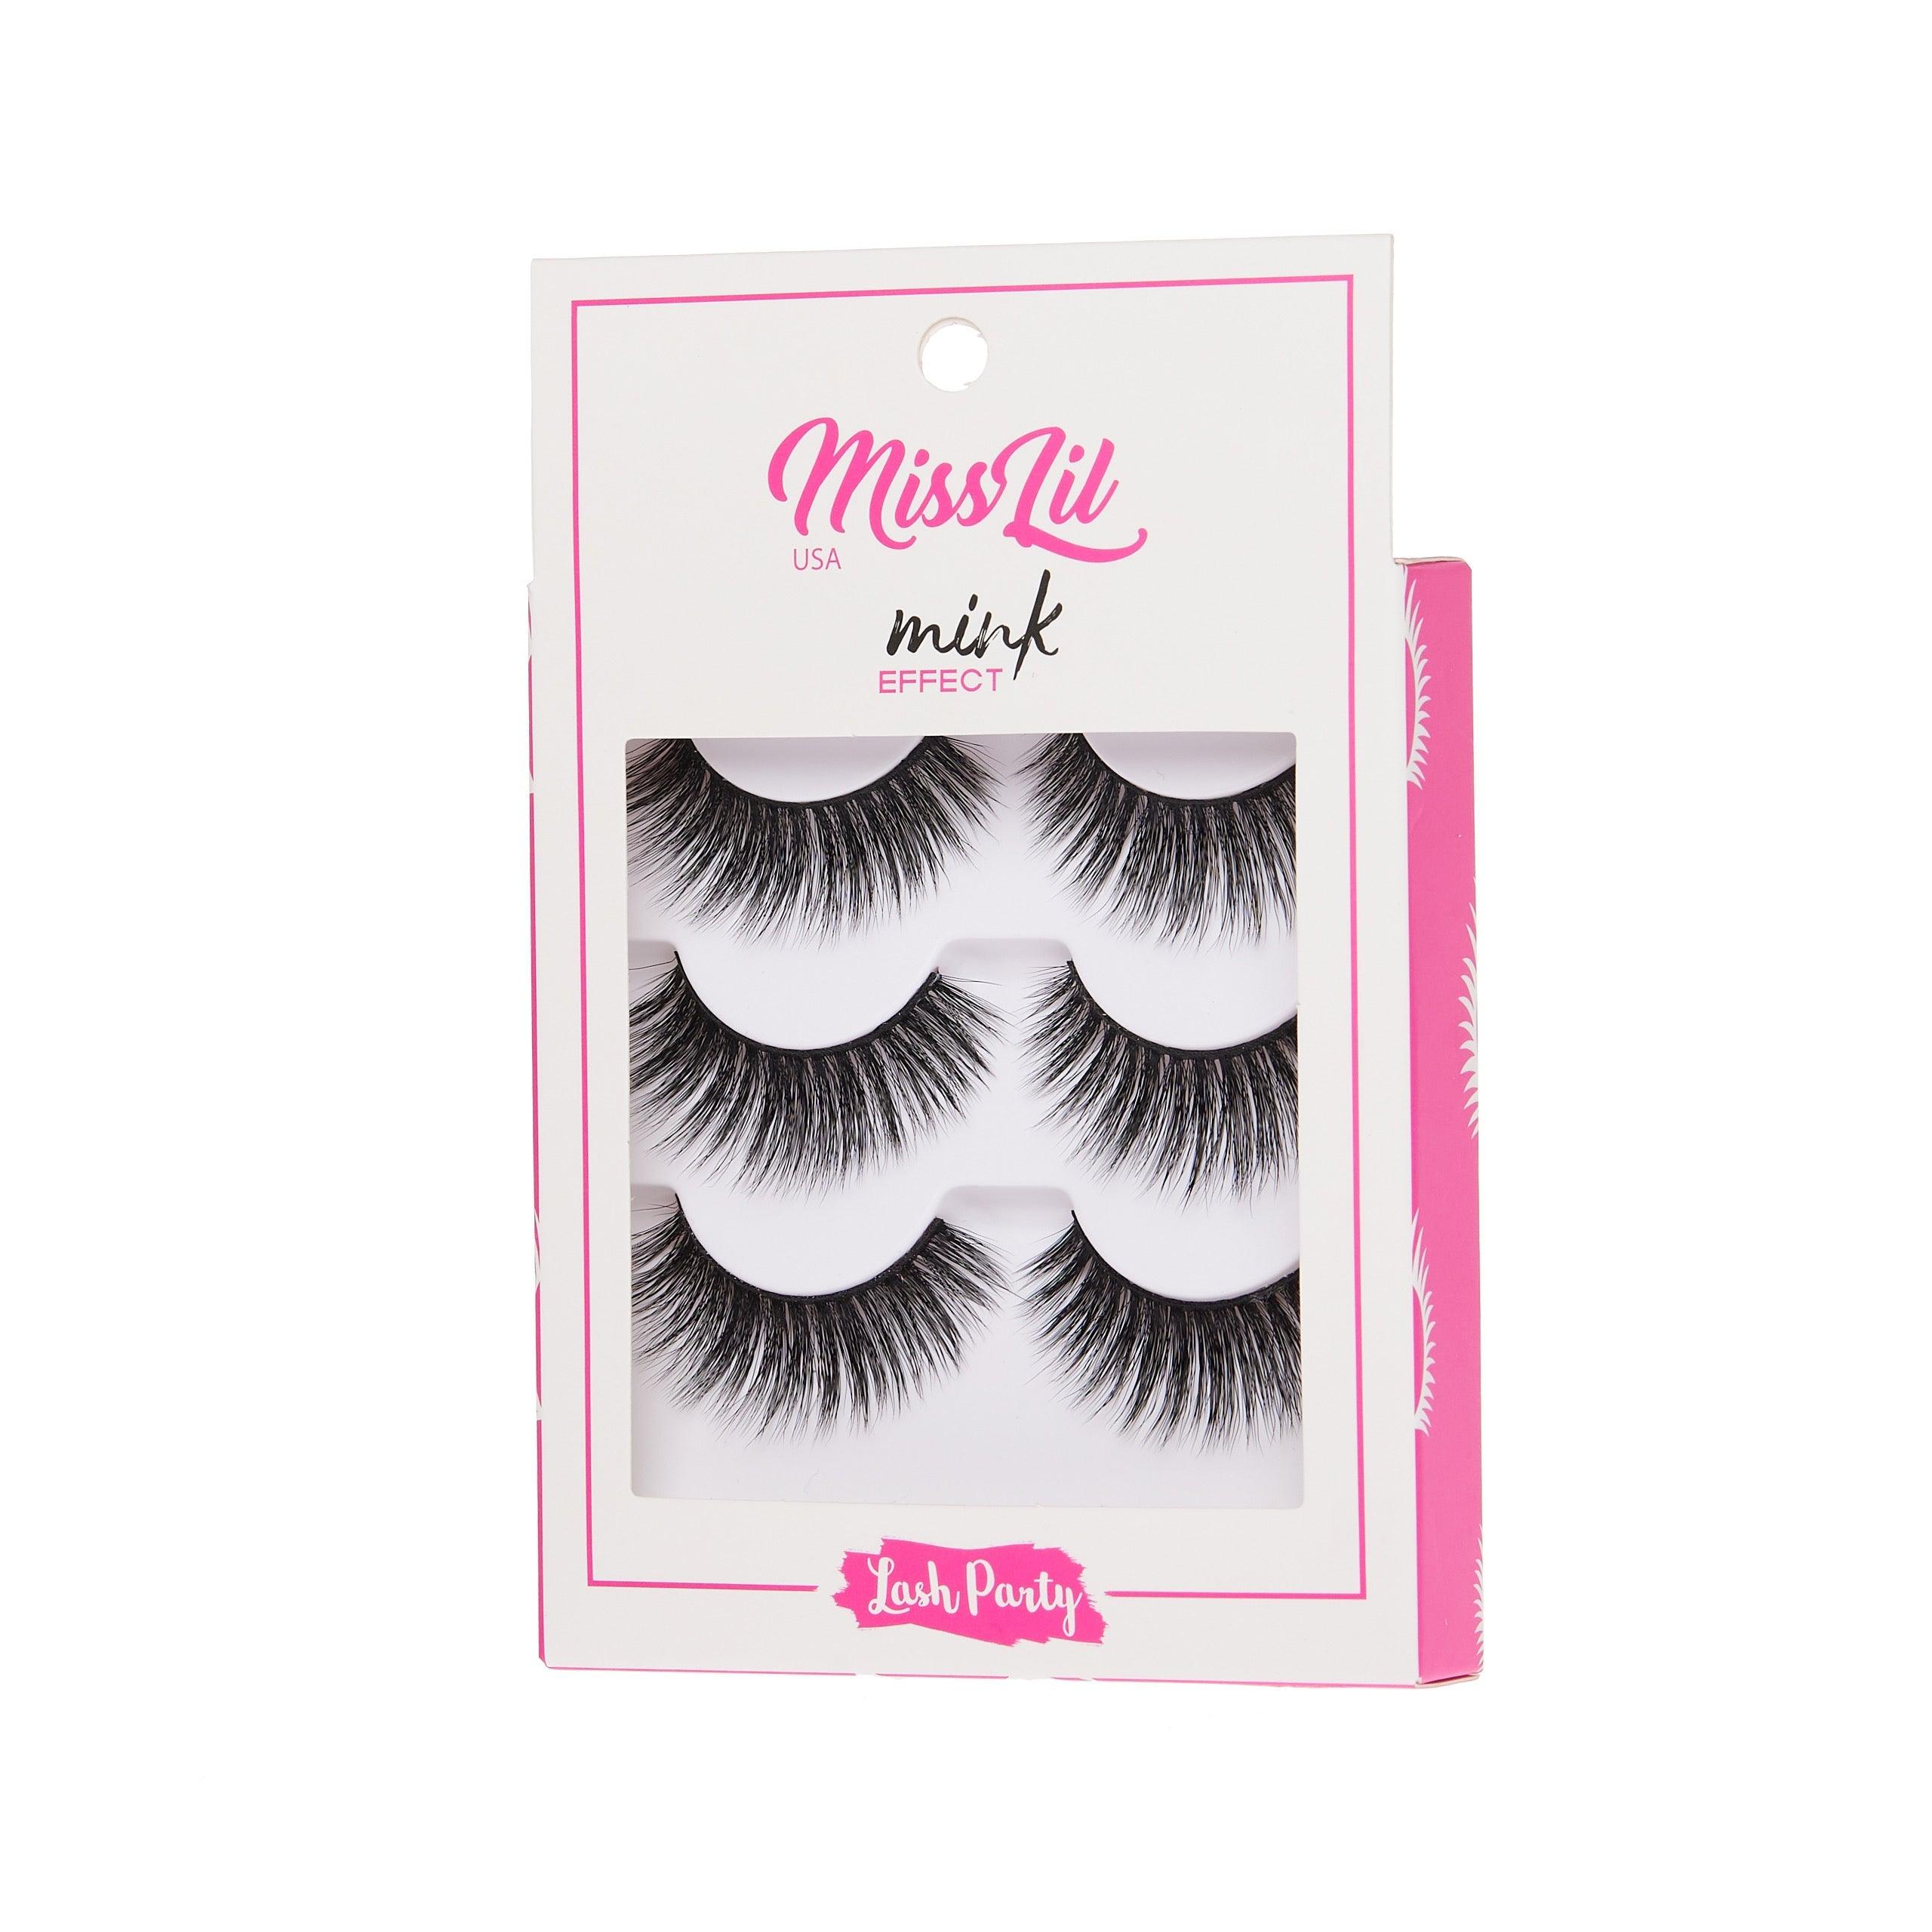 3-Pair Faux Mink Effect Eyelashes - Lash Party Collection #10 - Pack of 12 - Miss Lil USA